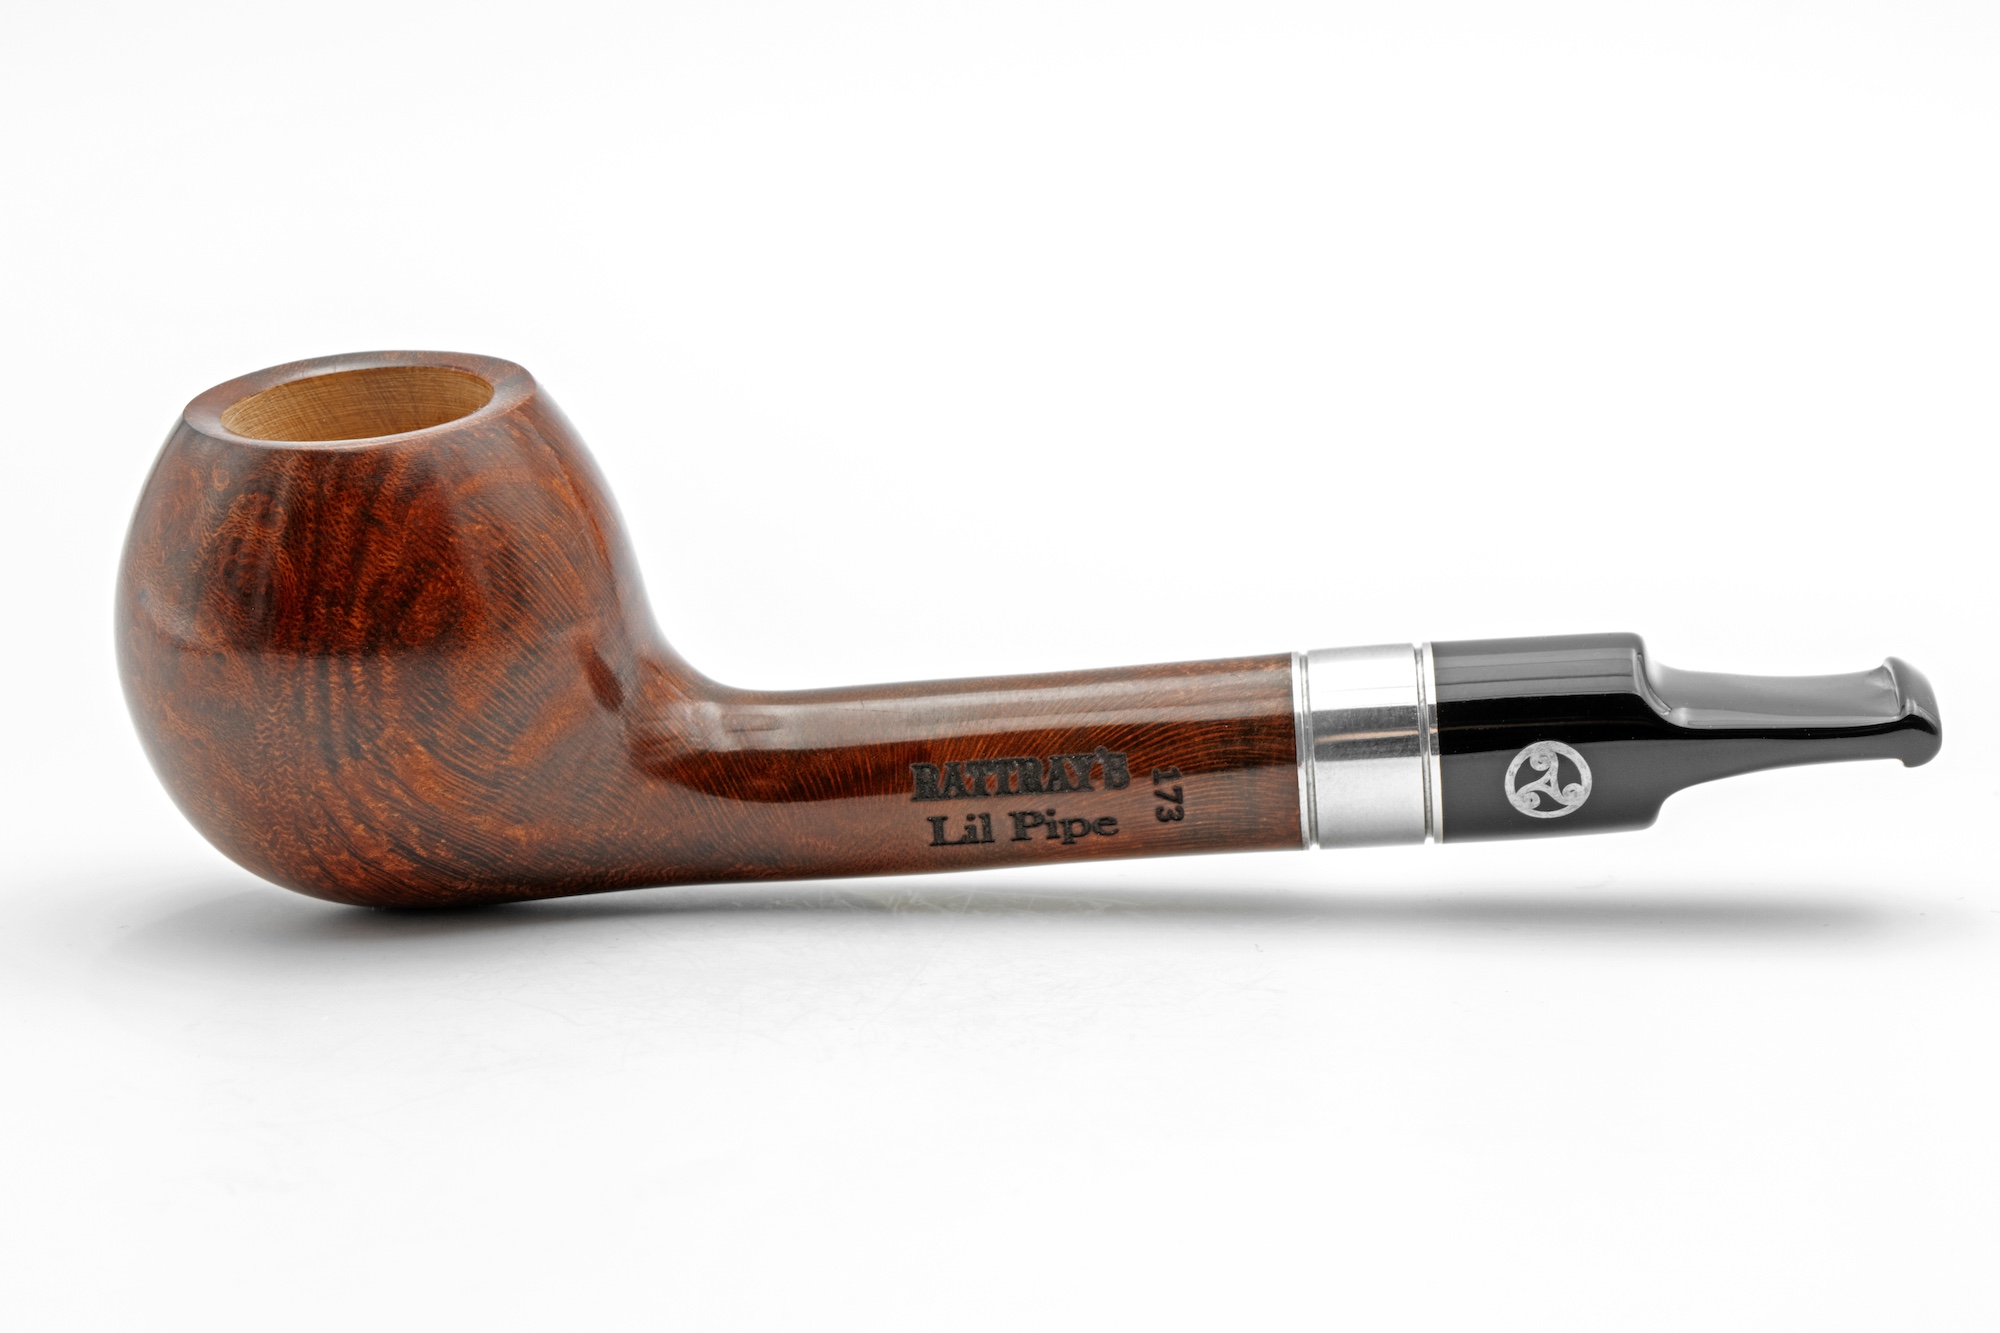 Rattray's Lil Pipe Terracotta 173